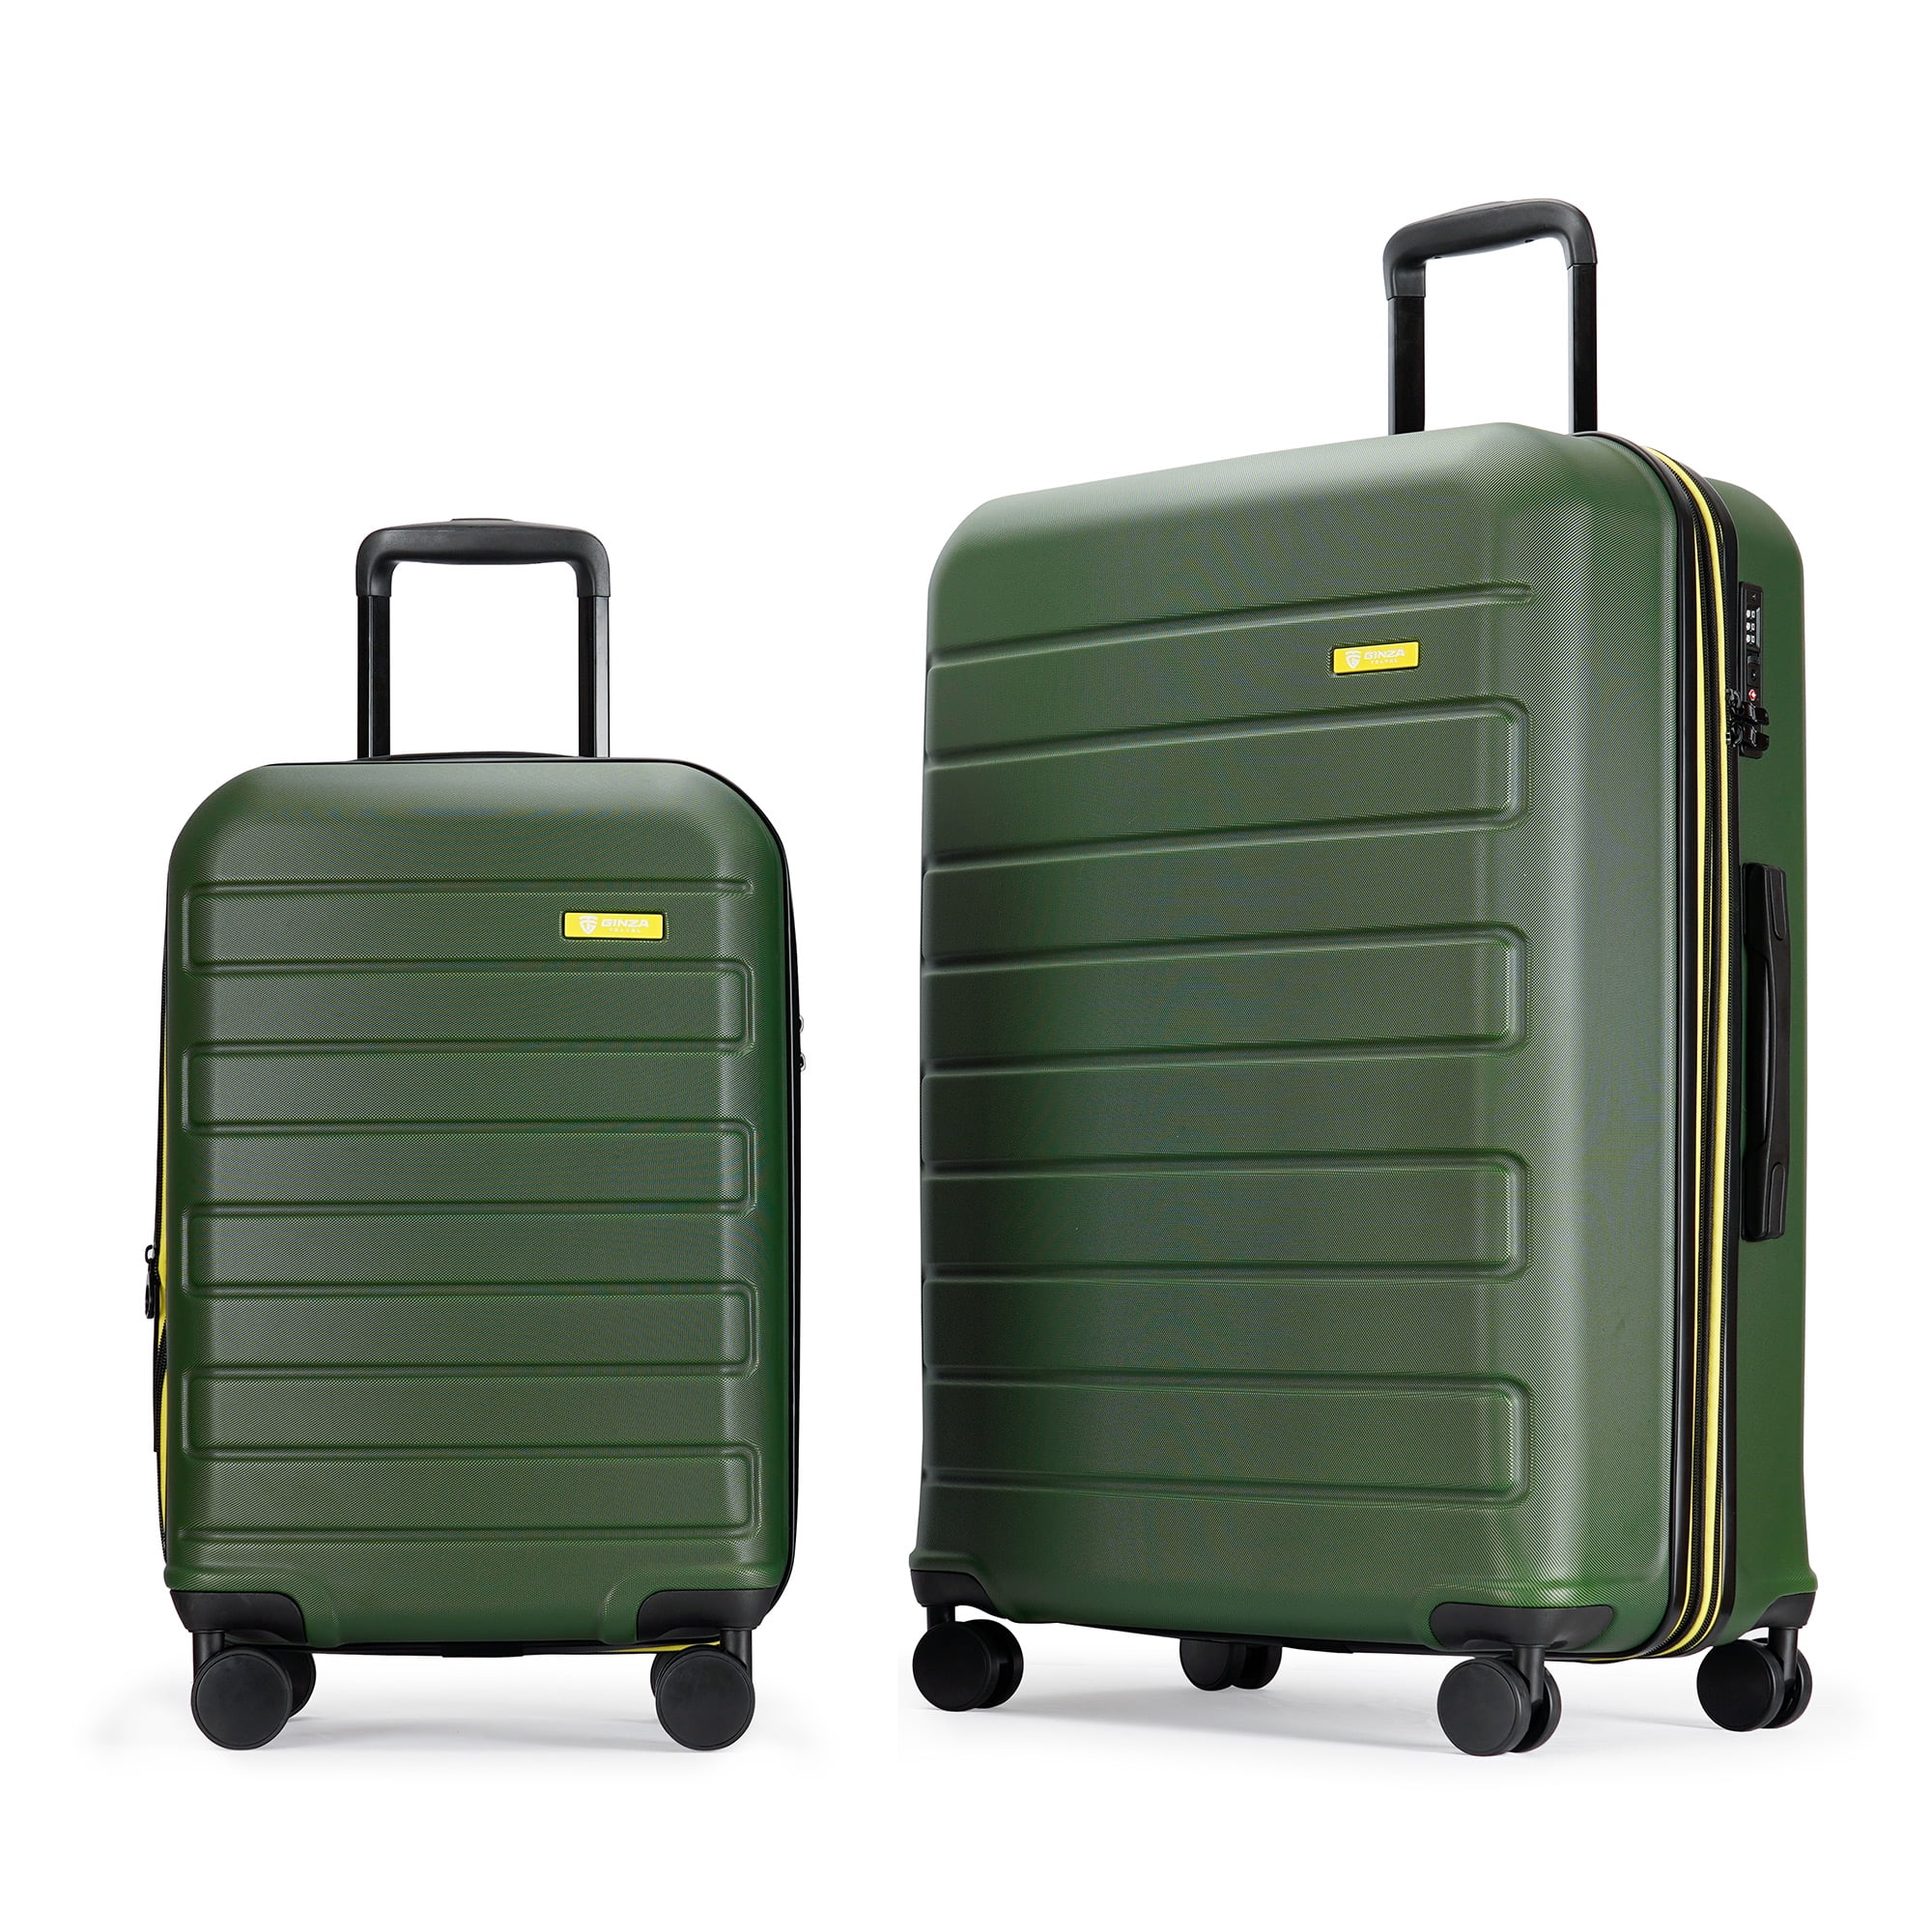 Ginza Travel Hard Shell Expandable Spinner Wheels Luggage Sets, White,  2-Piece Set (20/28),Green 